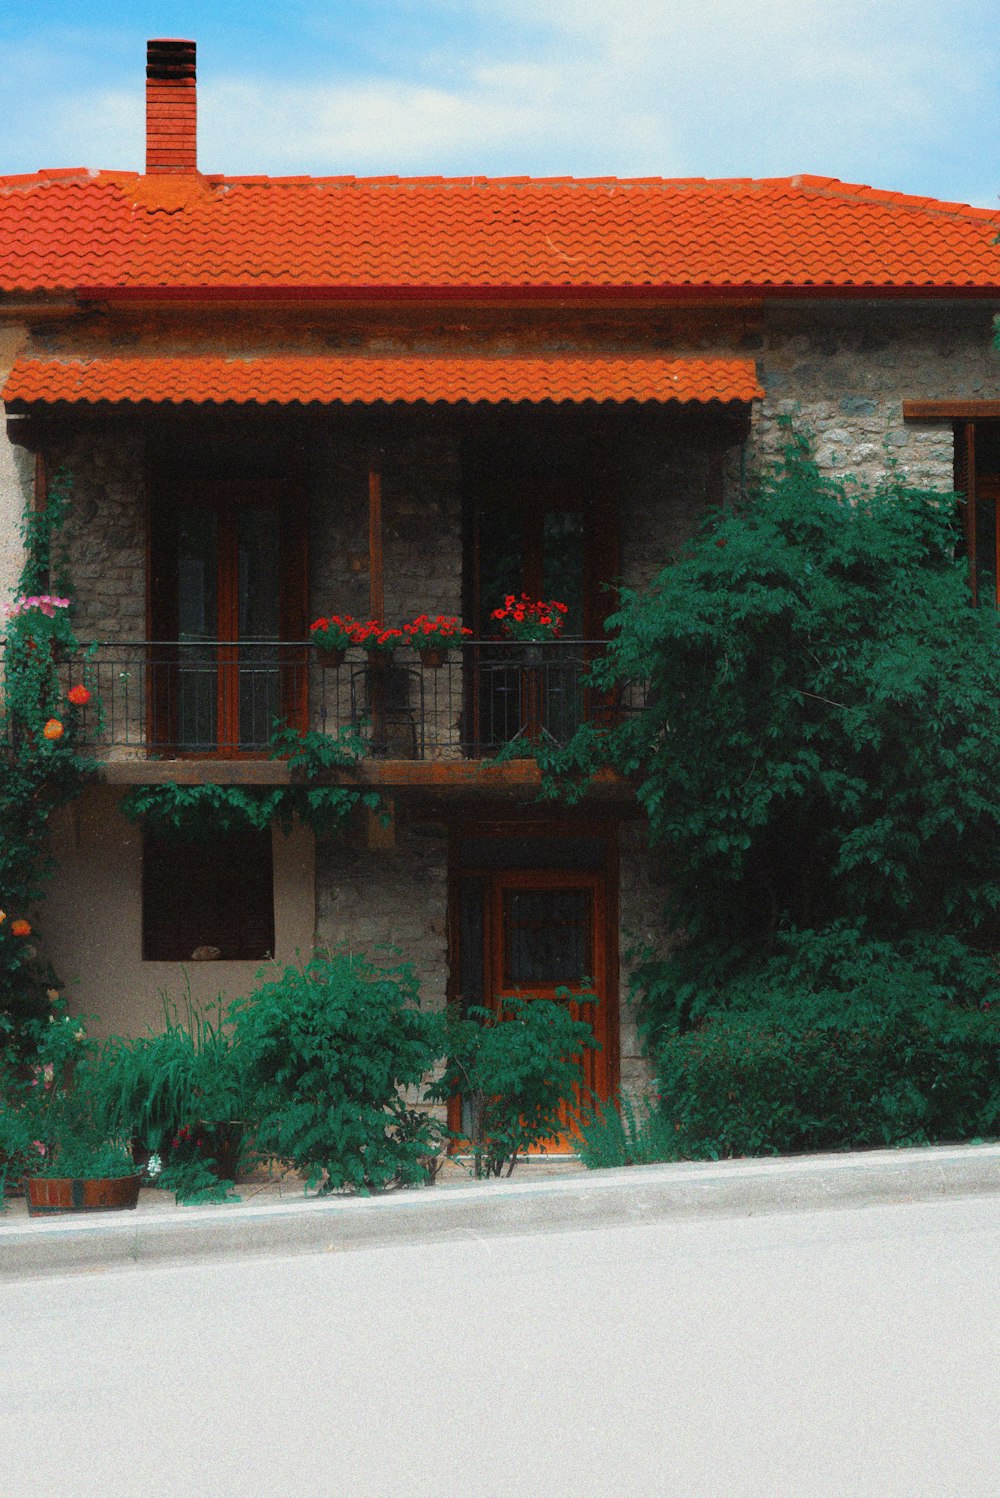 a building with a red roof and balcony